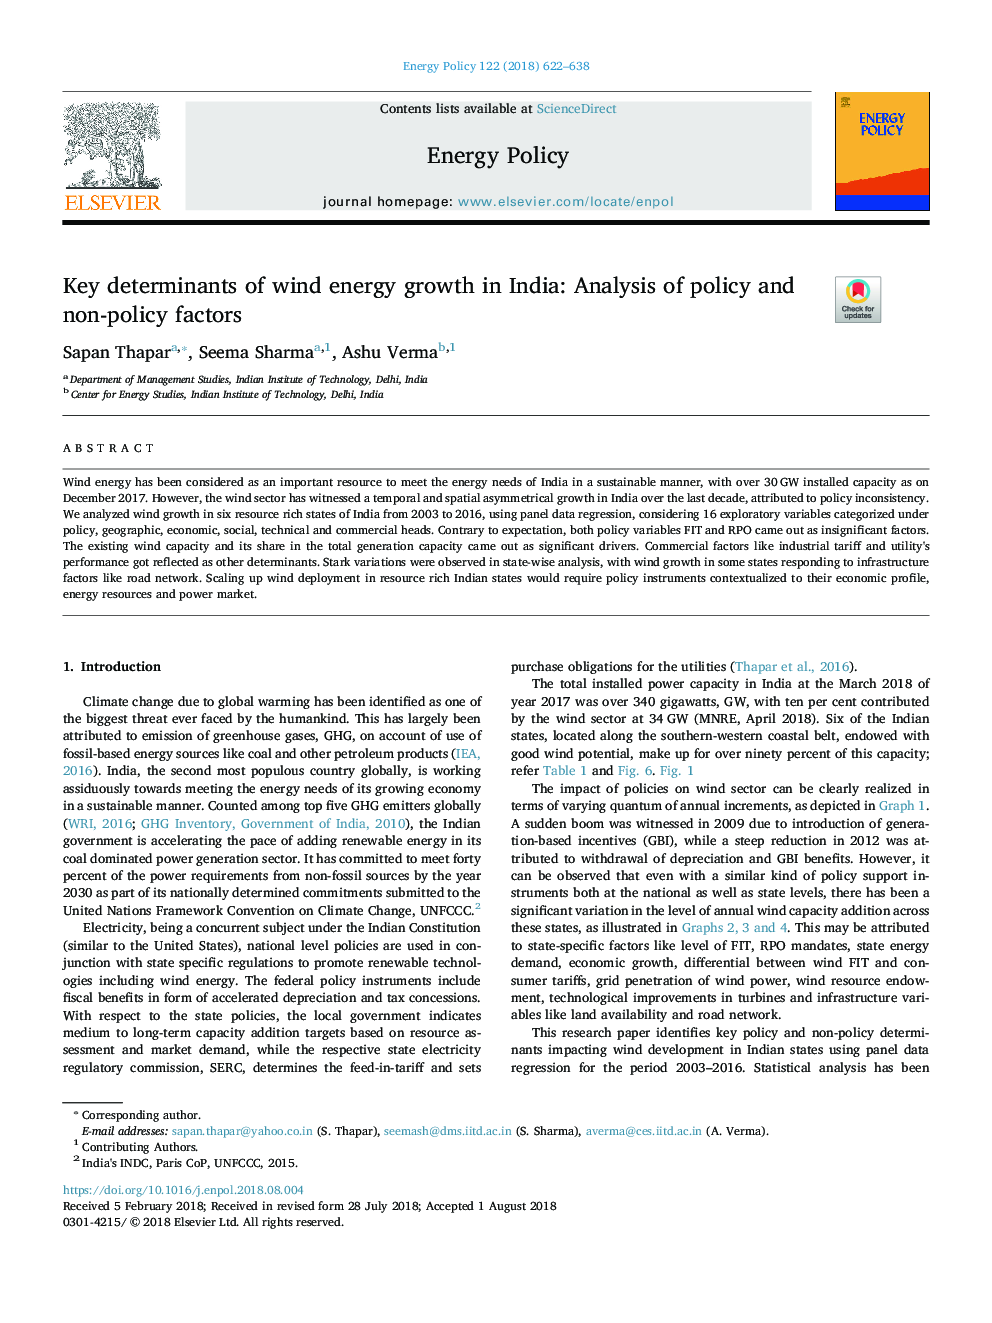 Key determinants of wind energy growth in India: Analysis of policy and non-policy factors